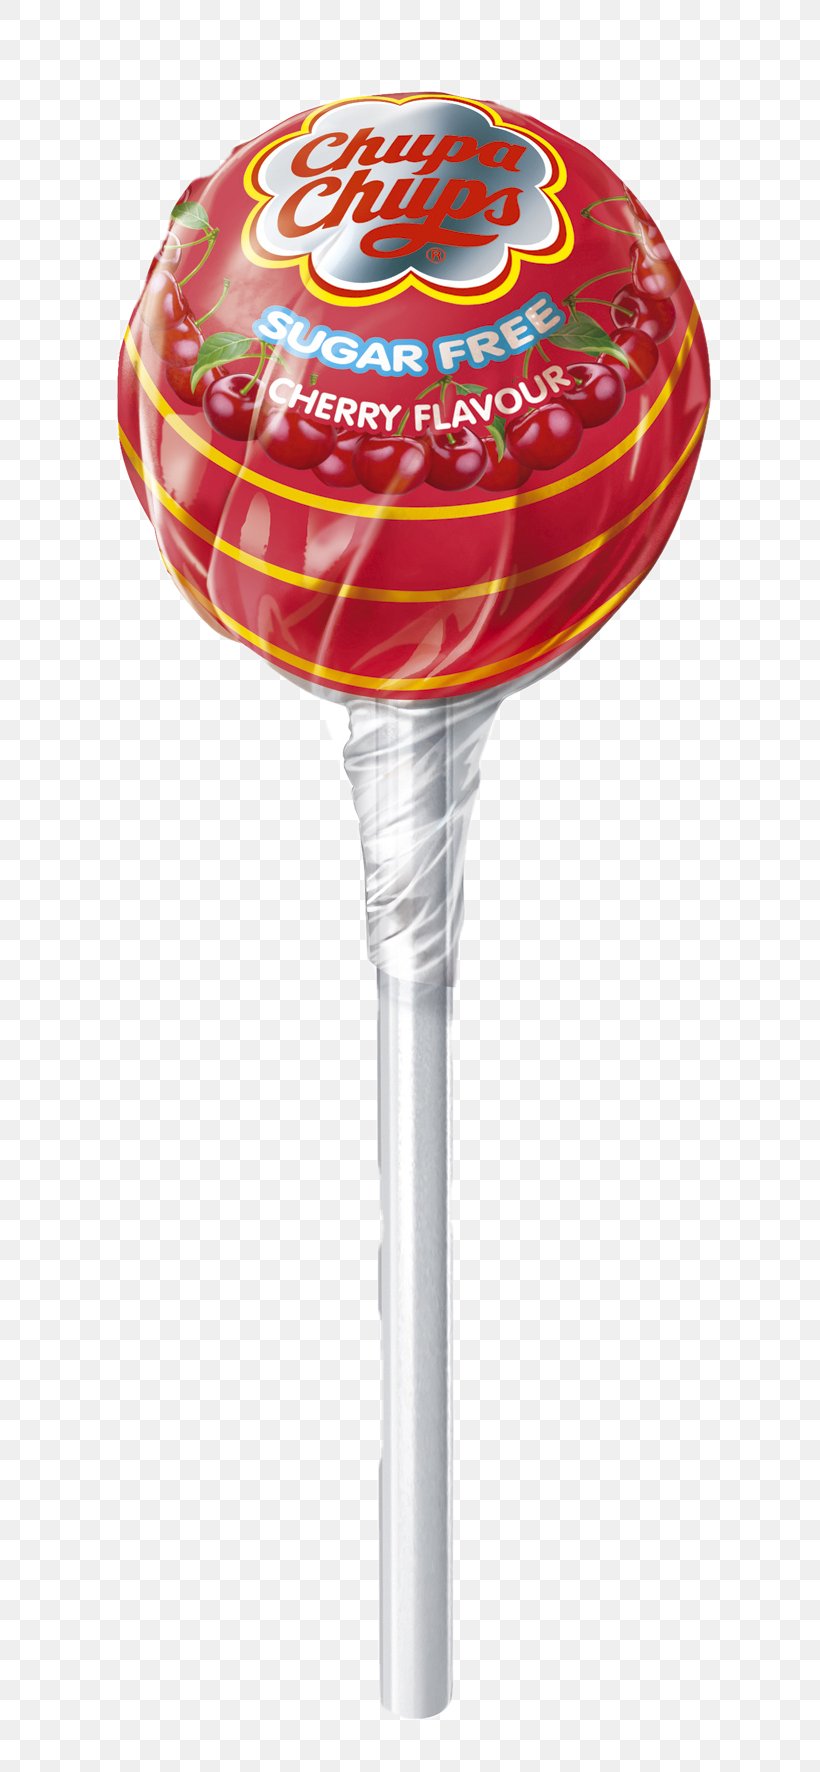 Lollipop Cartoon, PNG, 798x1772px, Lollipop, Candy, Chupa Chups, Confectionery, Food Download Free